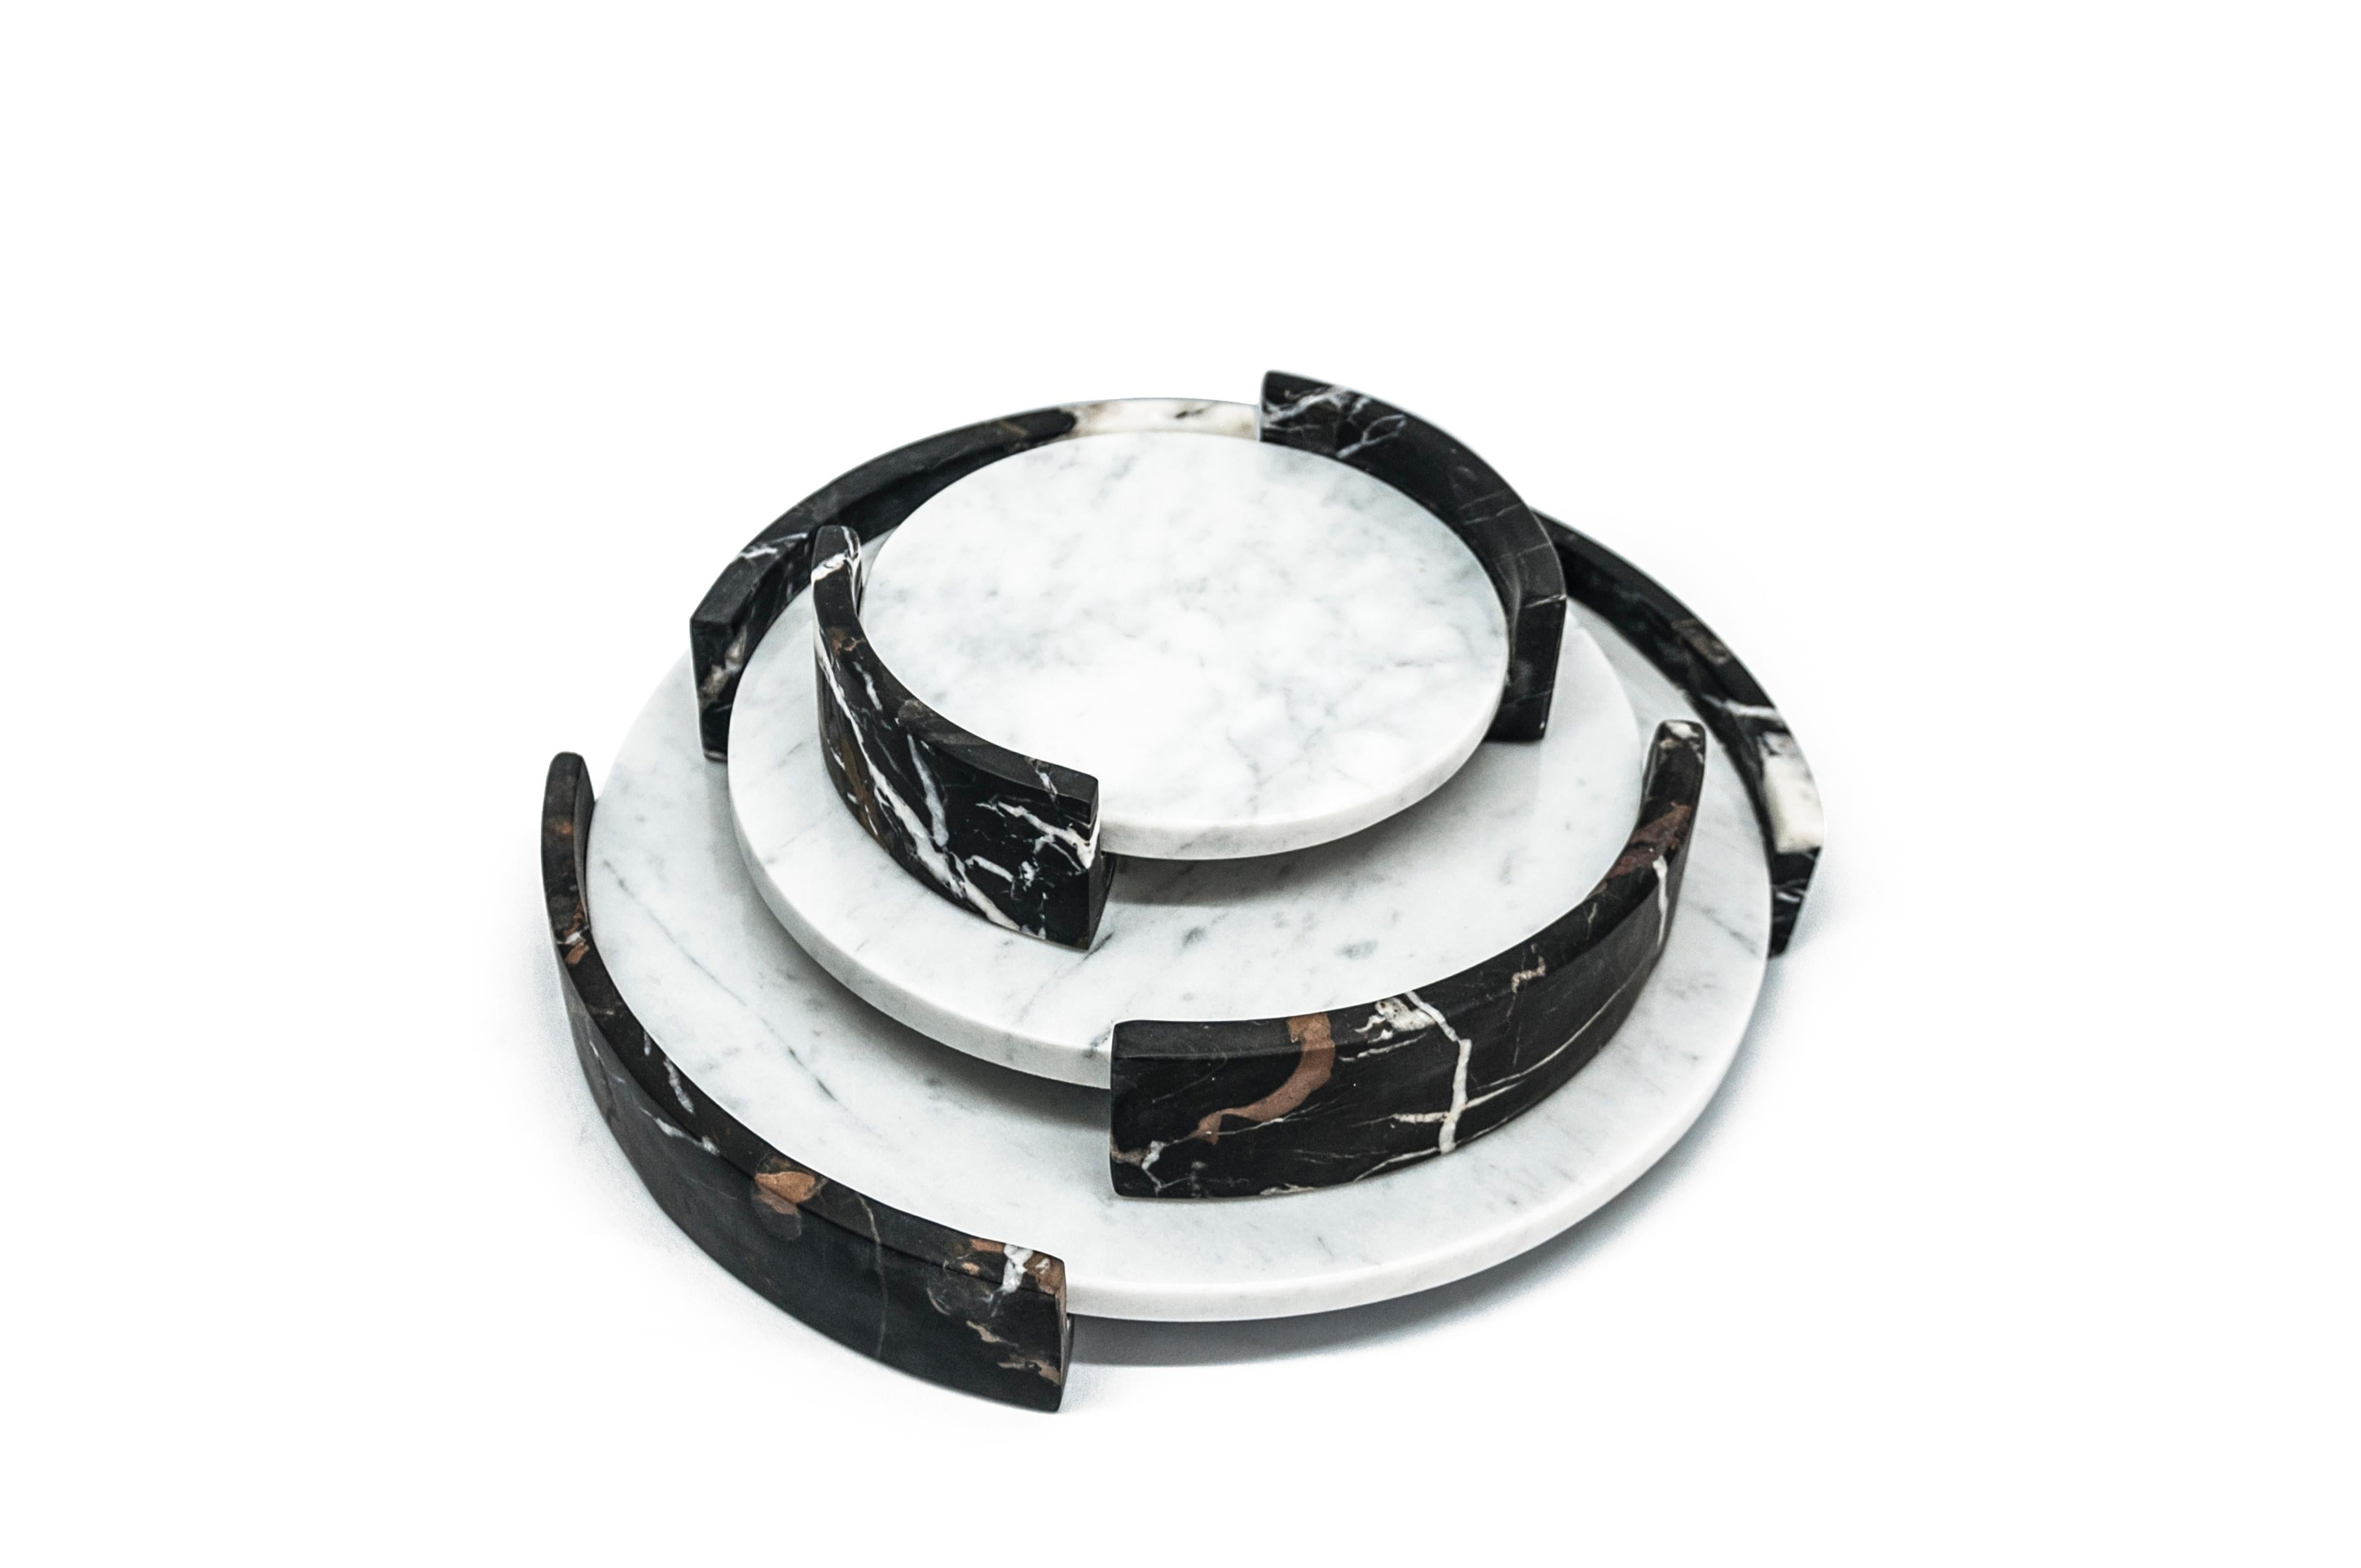 Medium circular triptych tray with handles in white Carrara and black Marquina marble. 
-Jacopo Simonetti design for Fiammetta V-
Each piece is in a way unique (every marble block is different in veins and shades) and handmade by Italian artisans